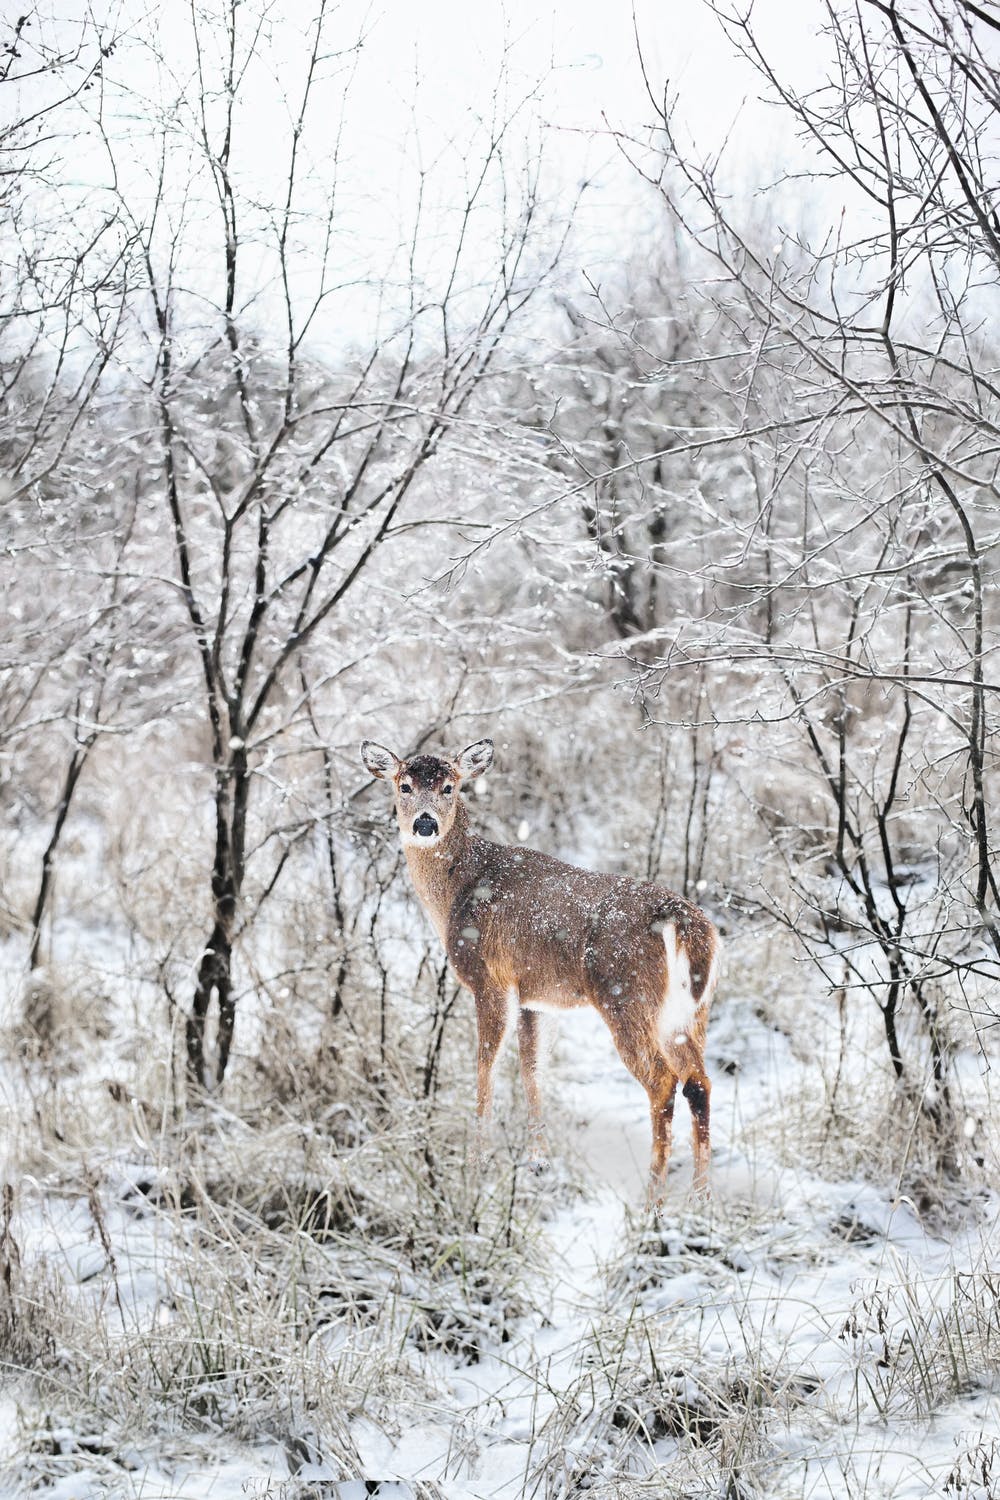 A deer standing in the snow near some trees - Snow